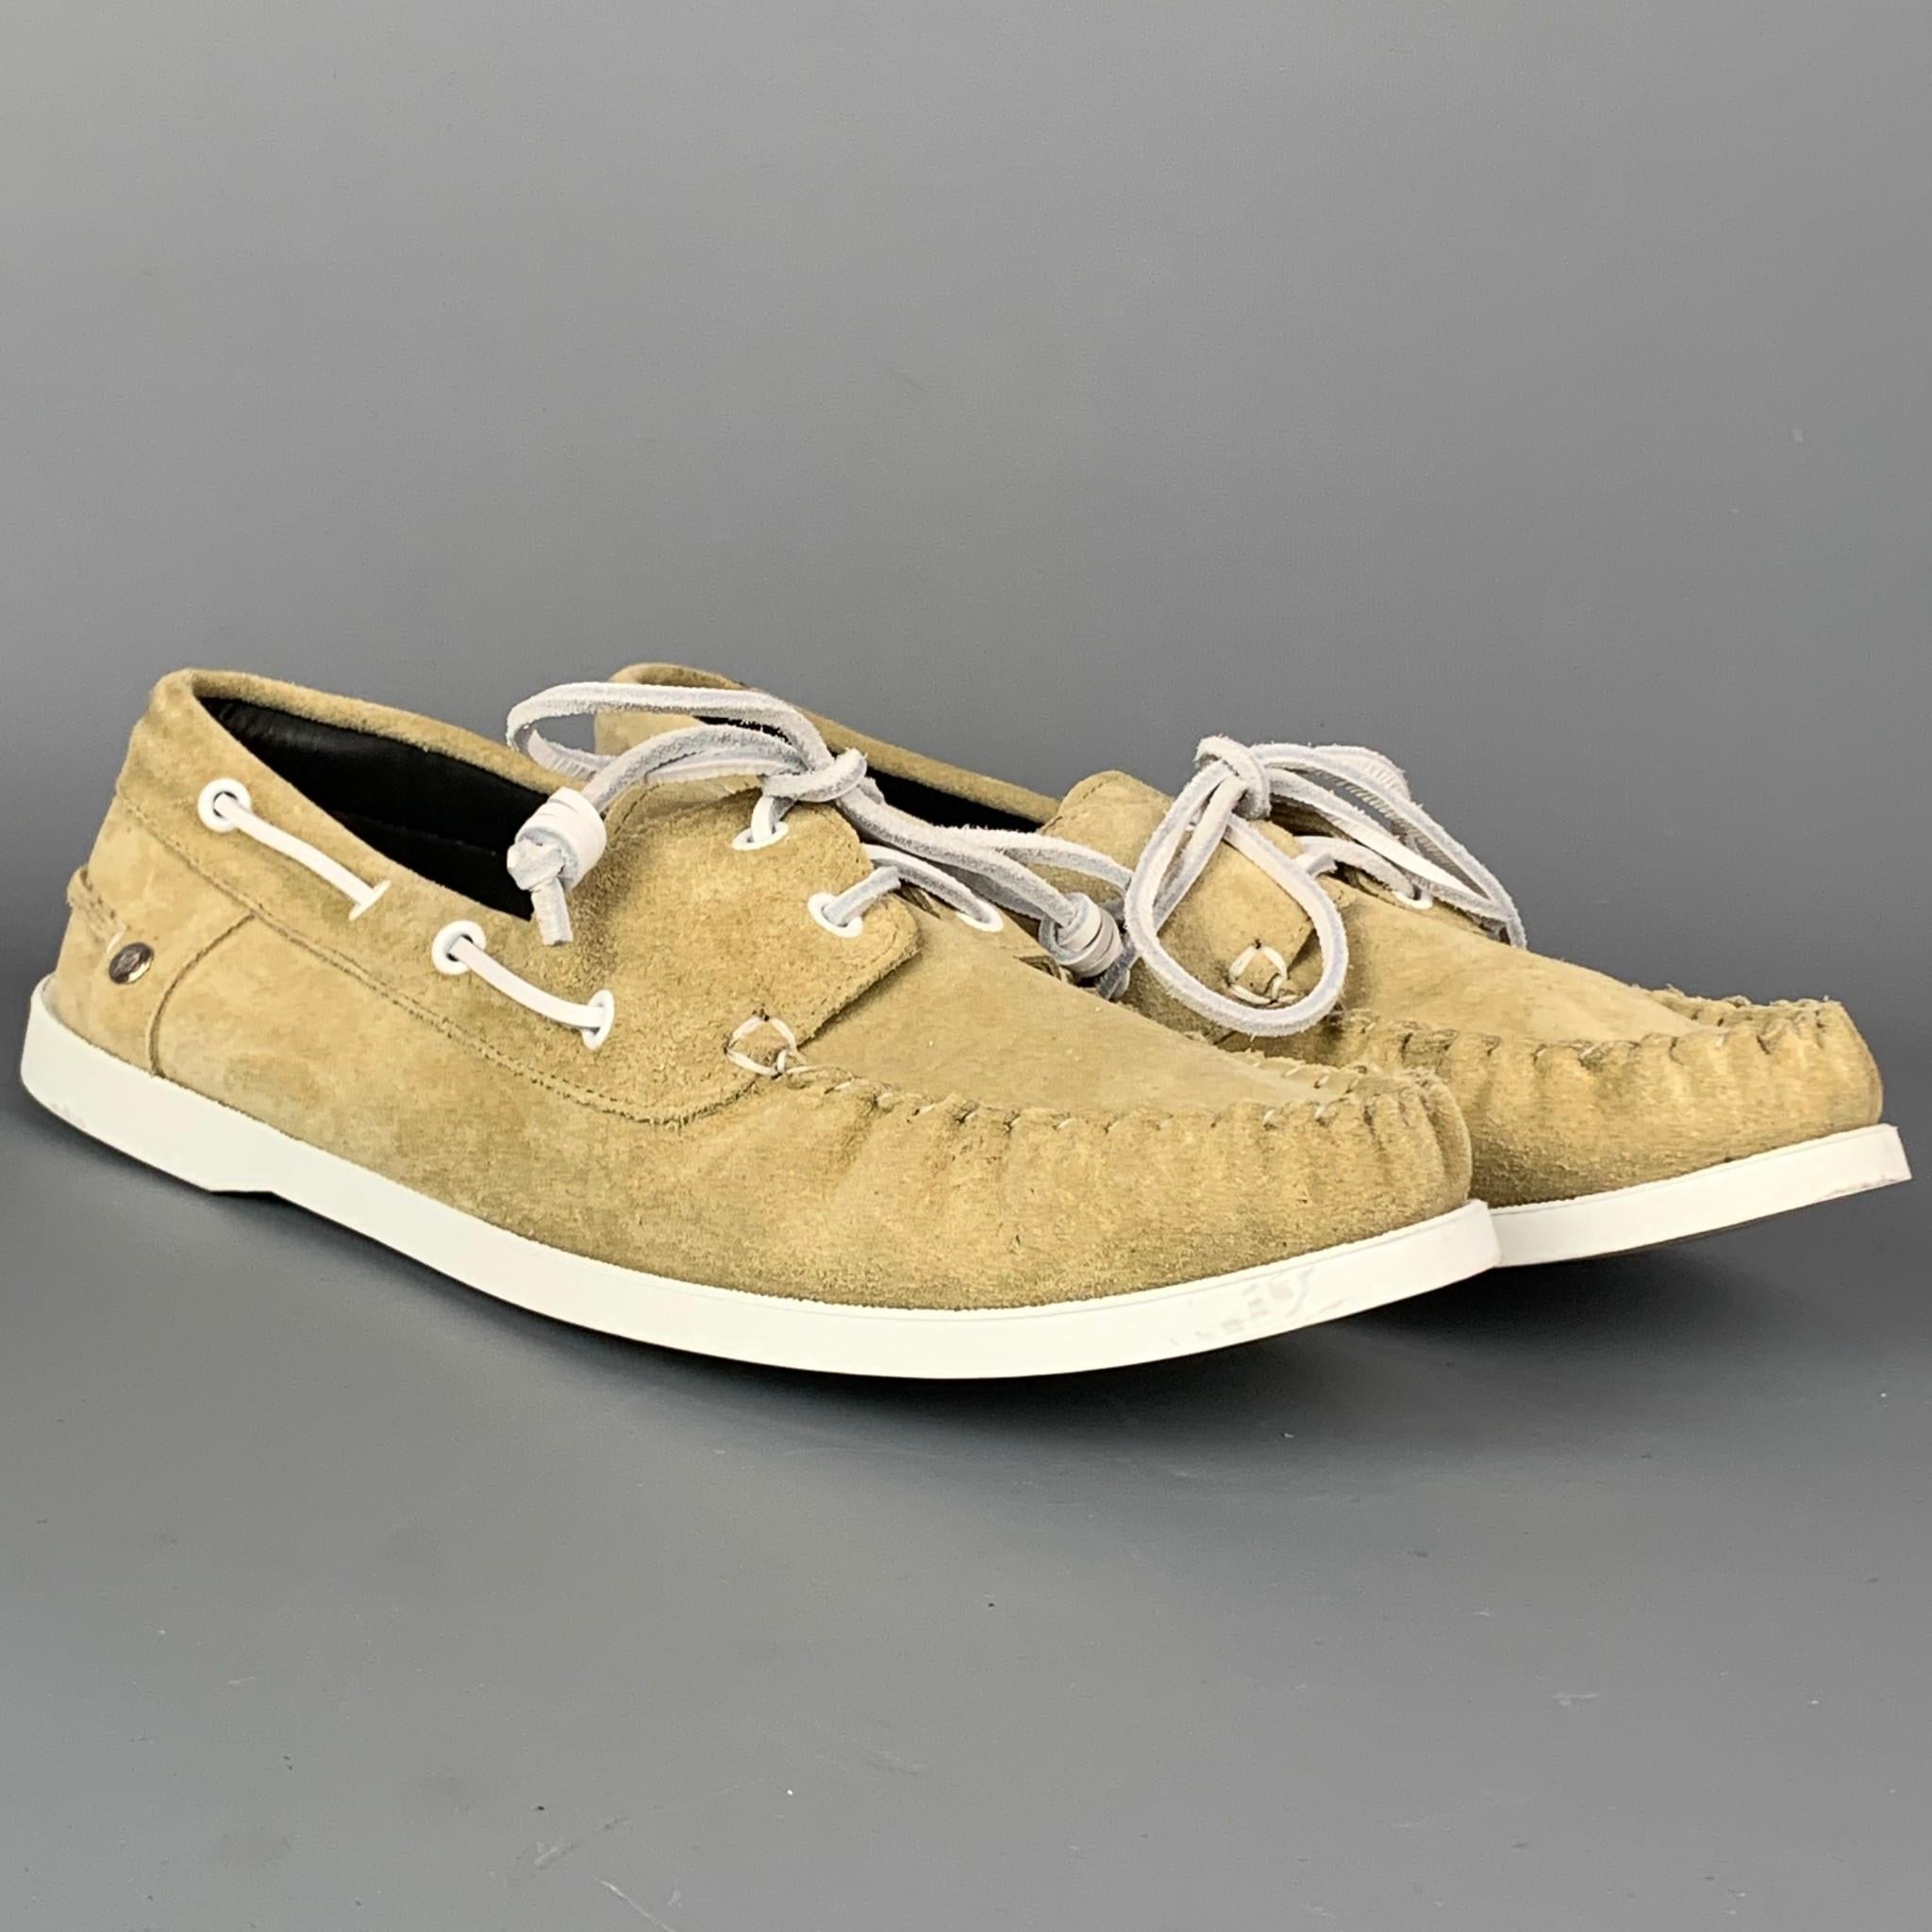 LOEWE loafers comes in a natural suede featuring a boat style, twisted trim, rubber sole, and a leather lace up closure. Made in Portugal.

Very Good Pre-Owned Condition.
Marked: EU 44

Outsole:

12 in. x 4 in. 

SKU: 109951
Category: Loafers

More